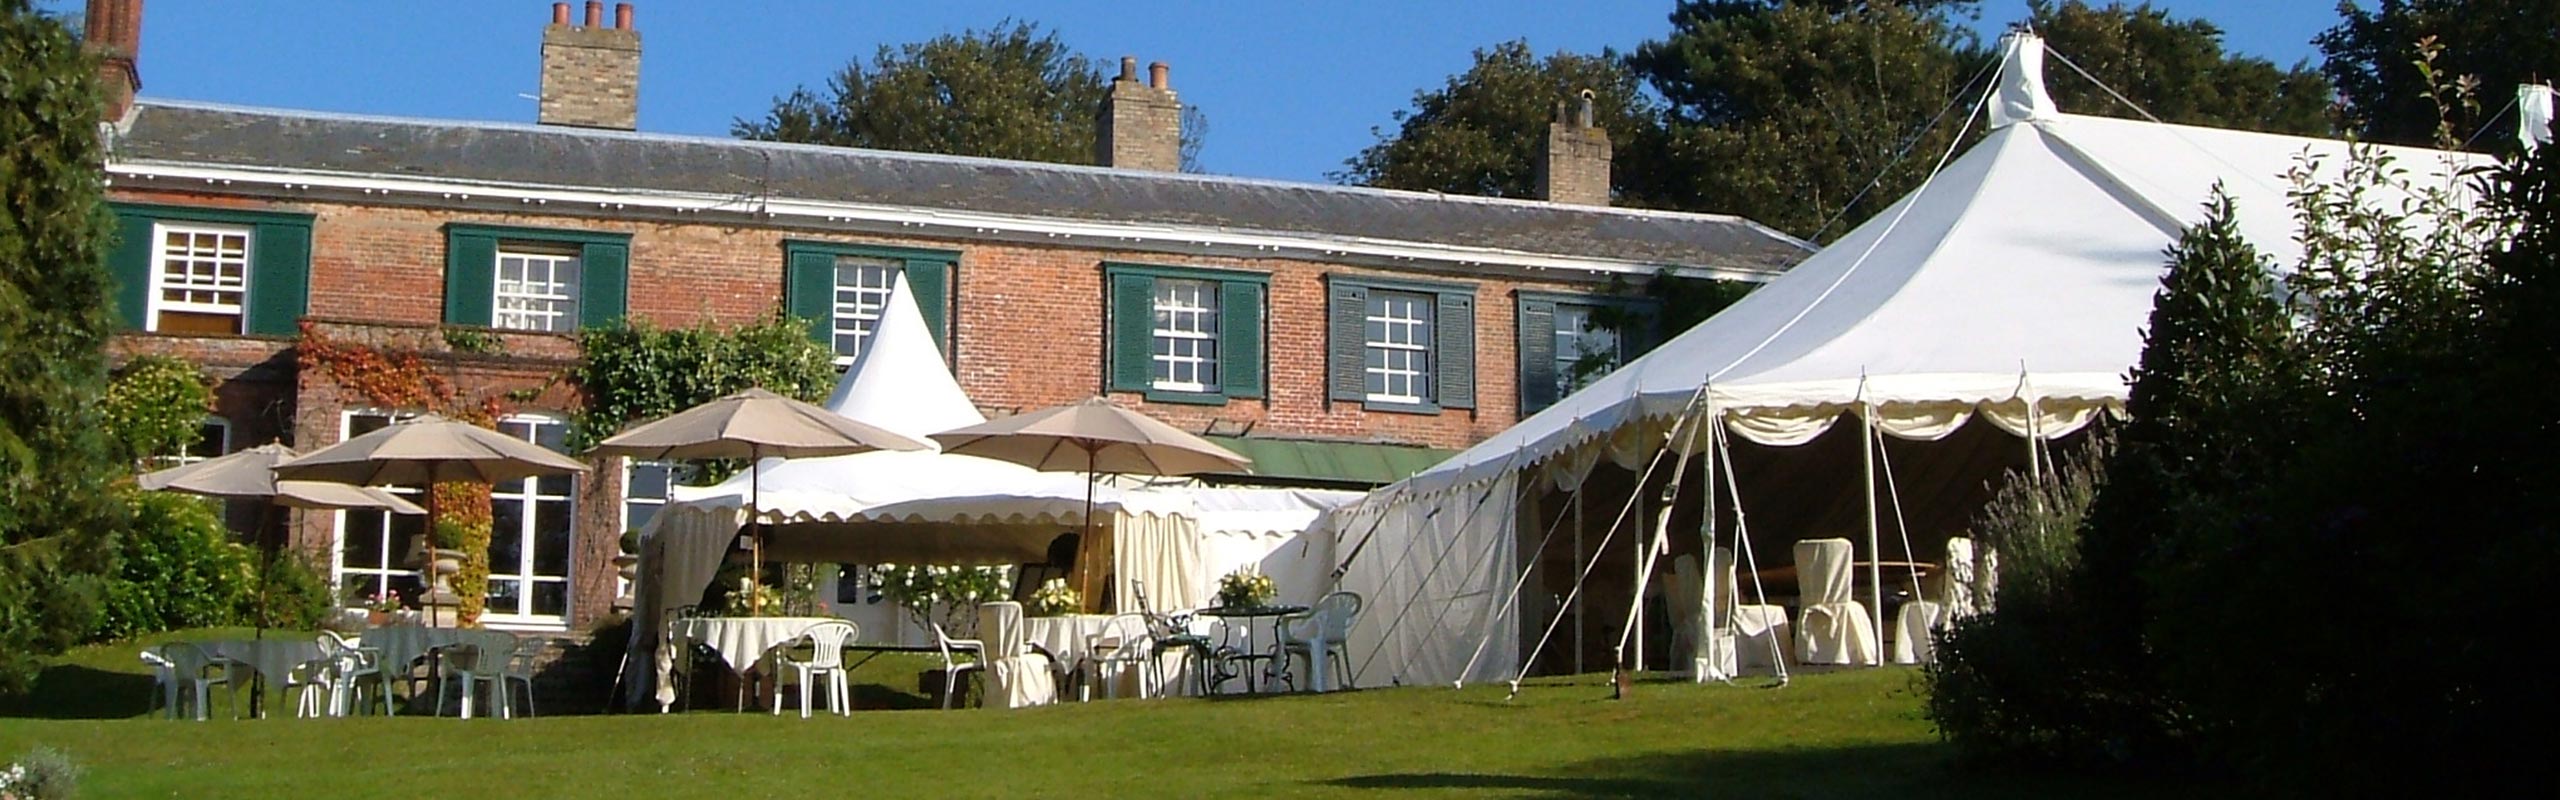 Wedding Marquee Hire Packages